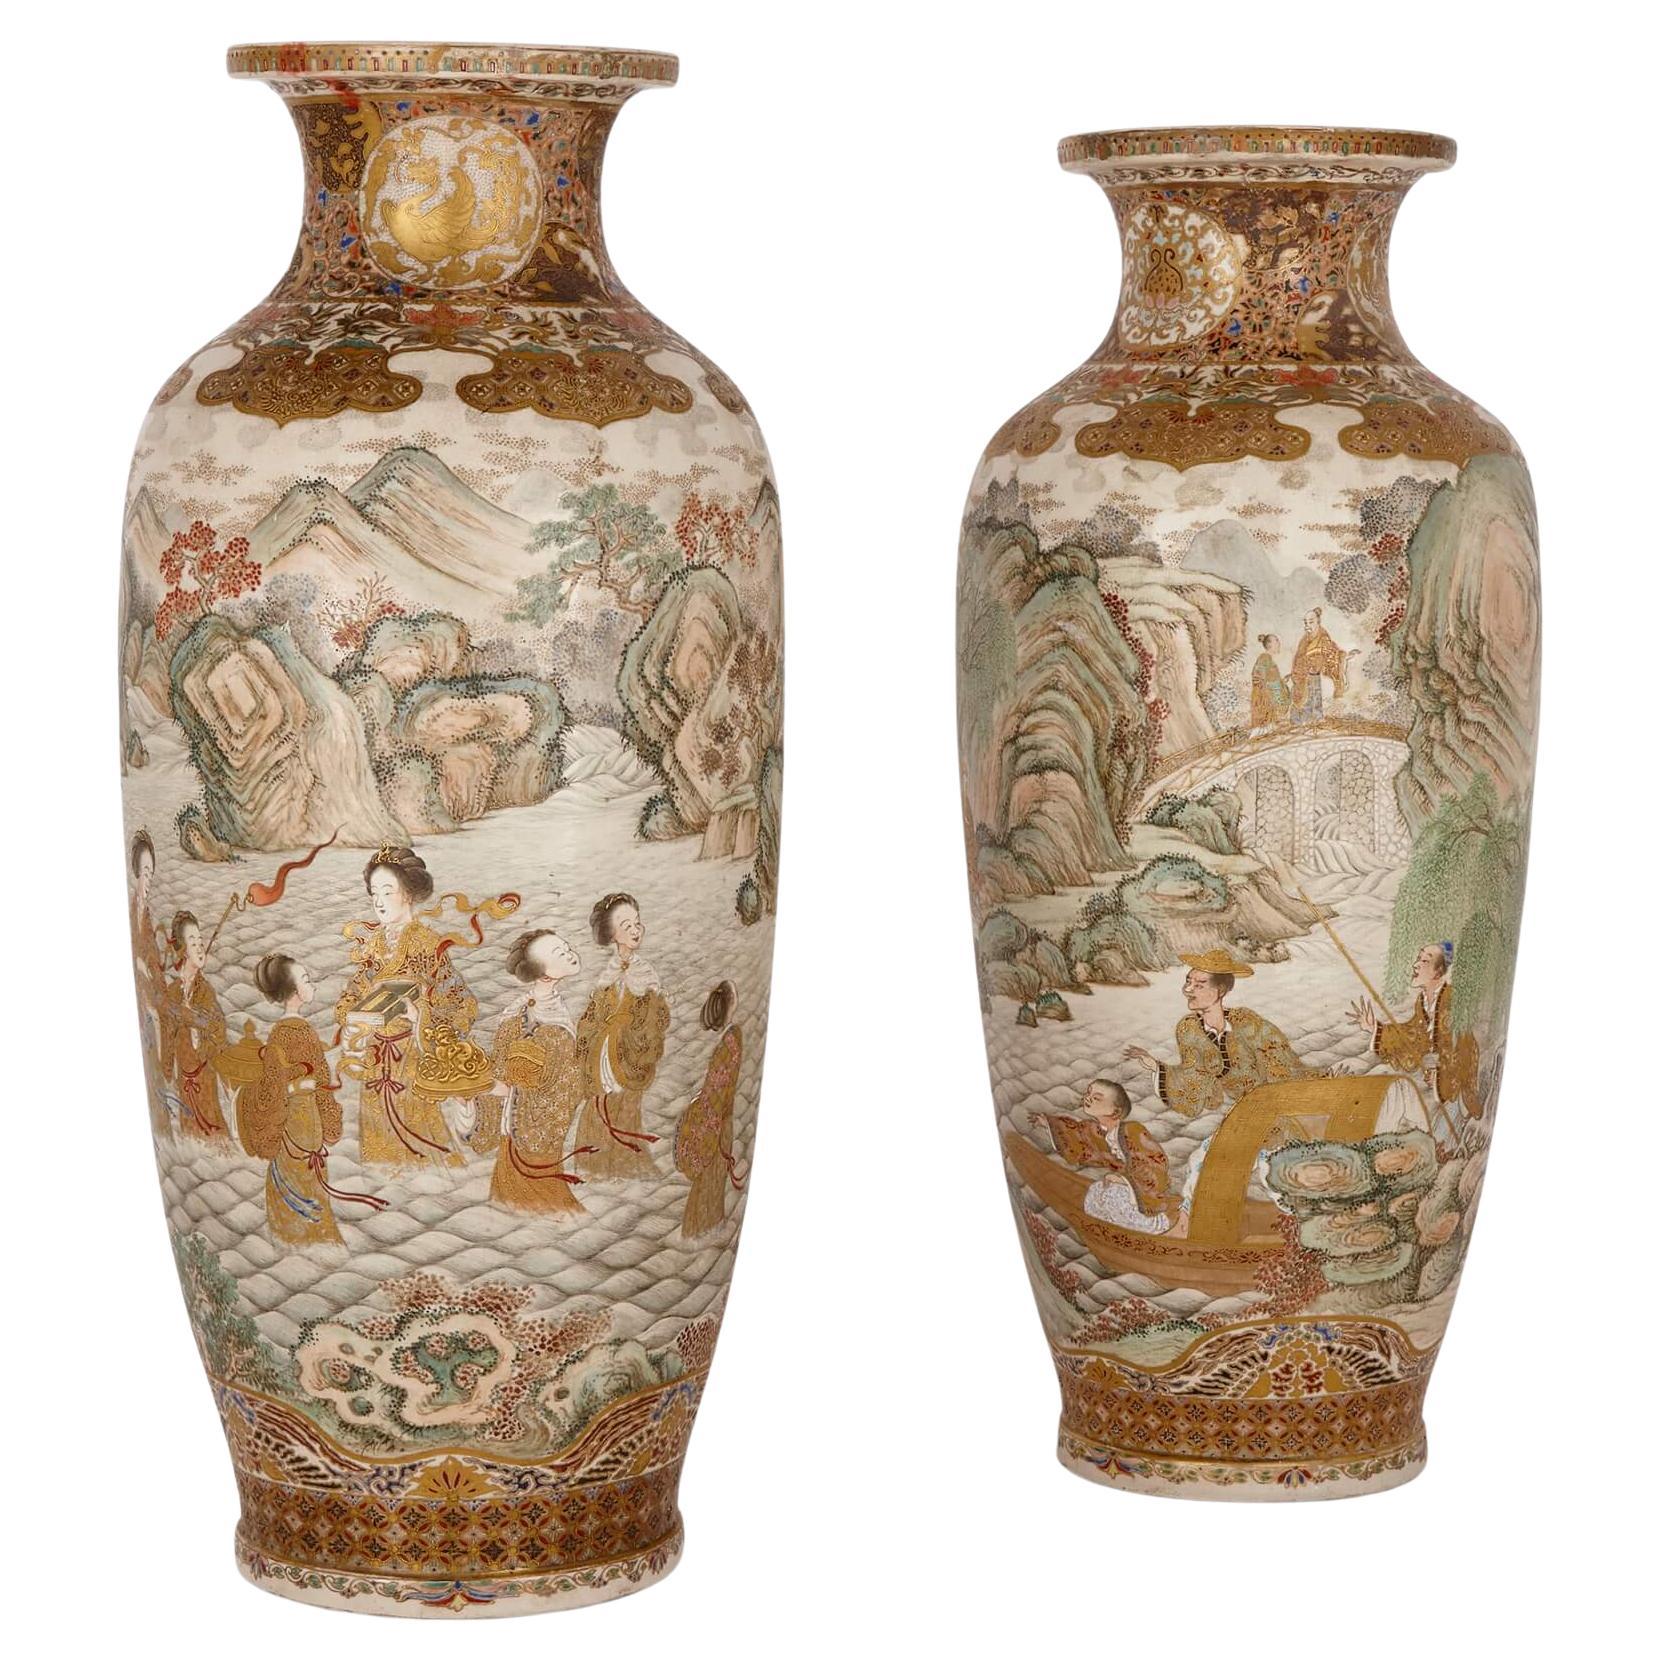 A pair of large Meiji period Satsuma Rouleau vases